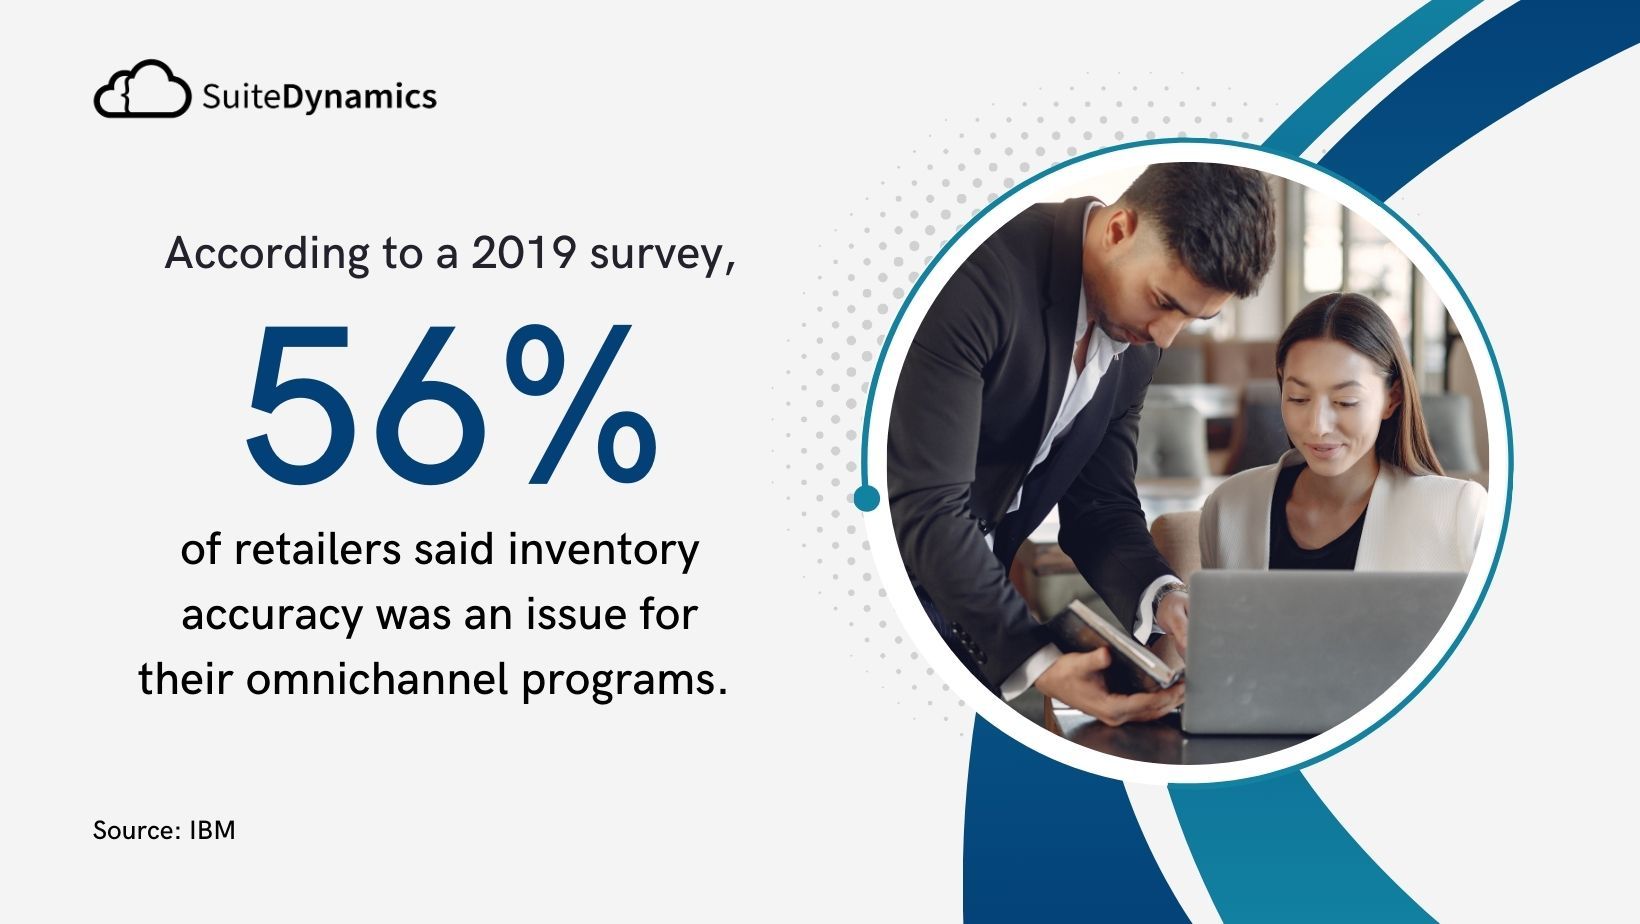 Graphic stating that according to a 2019 survey, inventory accuracy was an issue for their omnichannel programs.